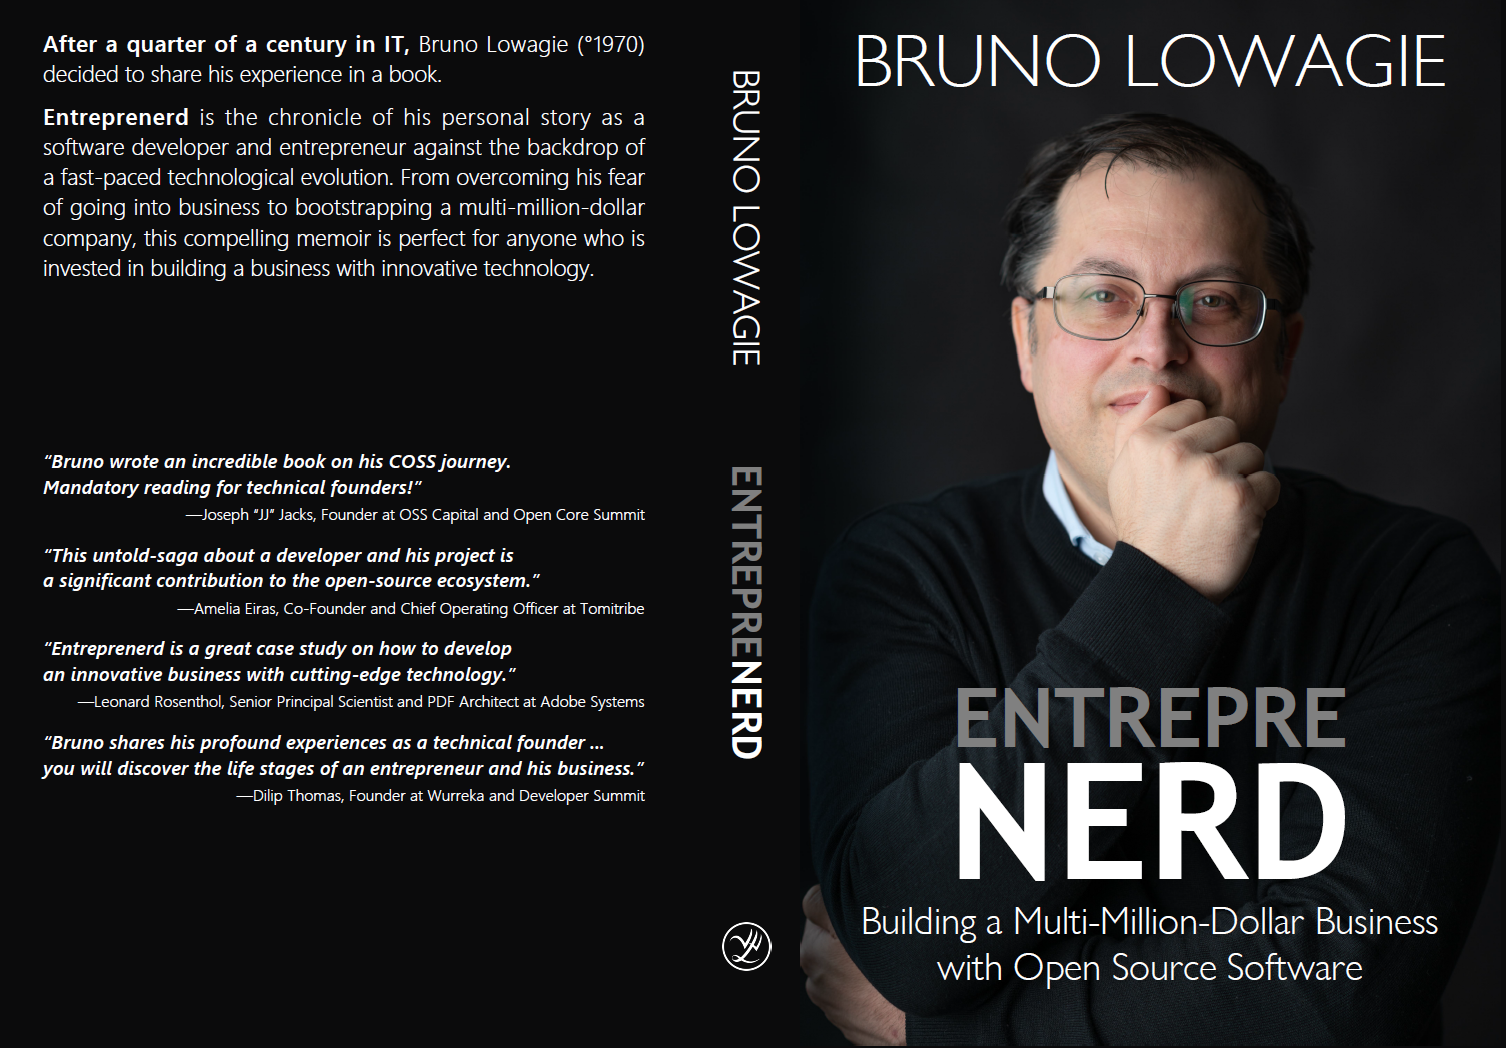 Entreprenerd: front and back cover